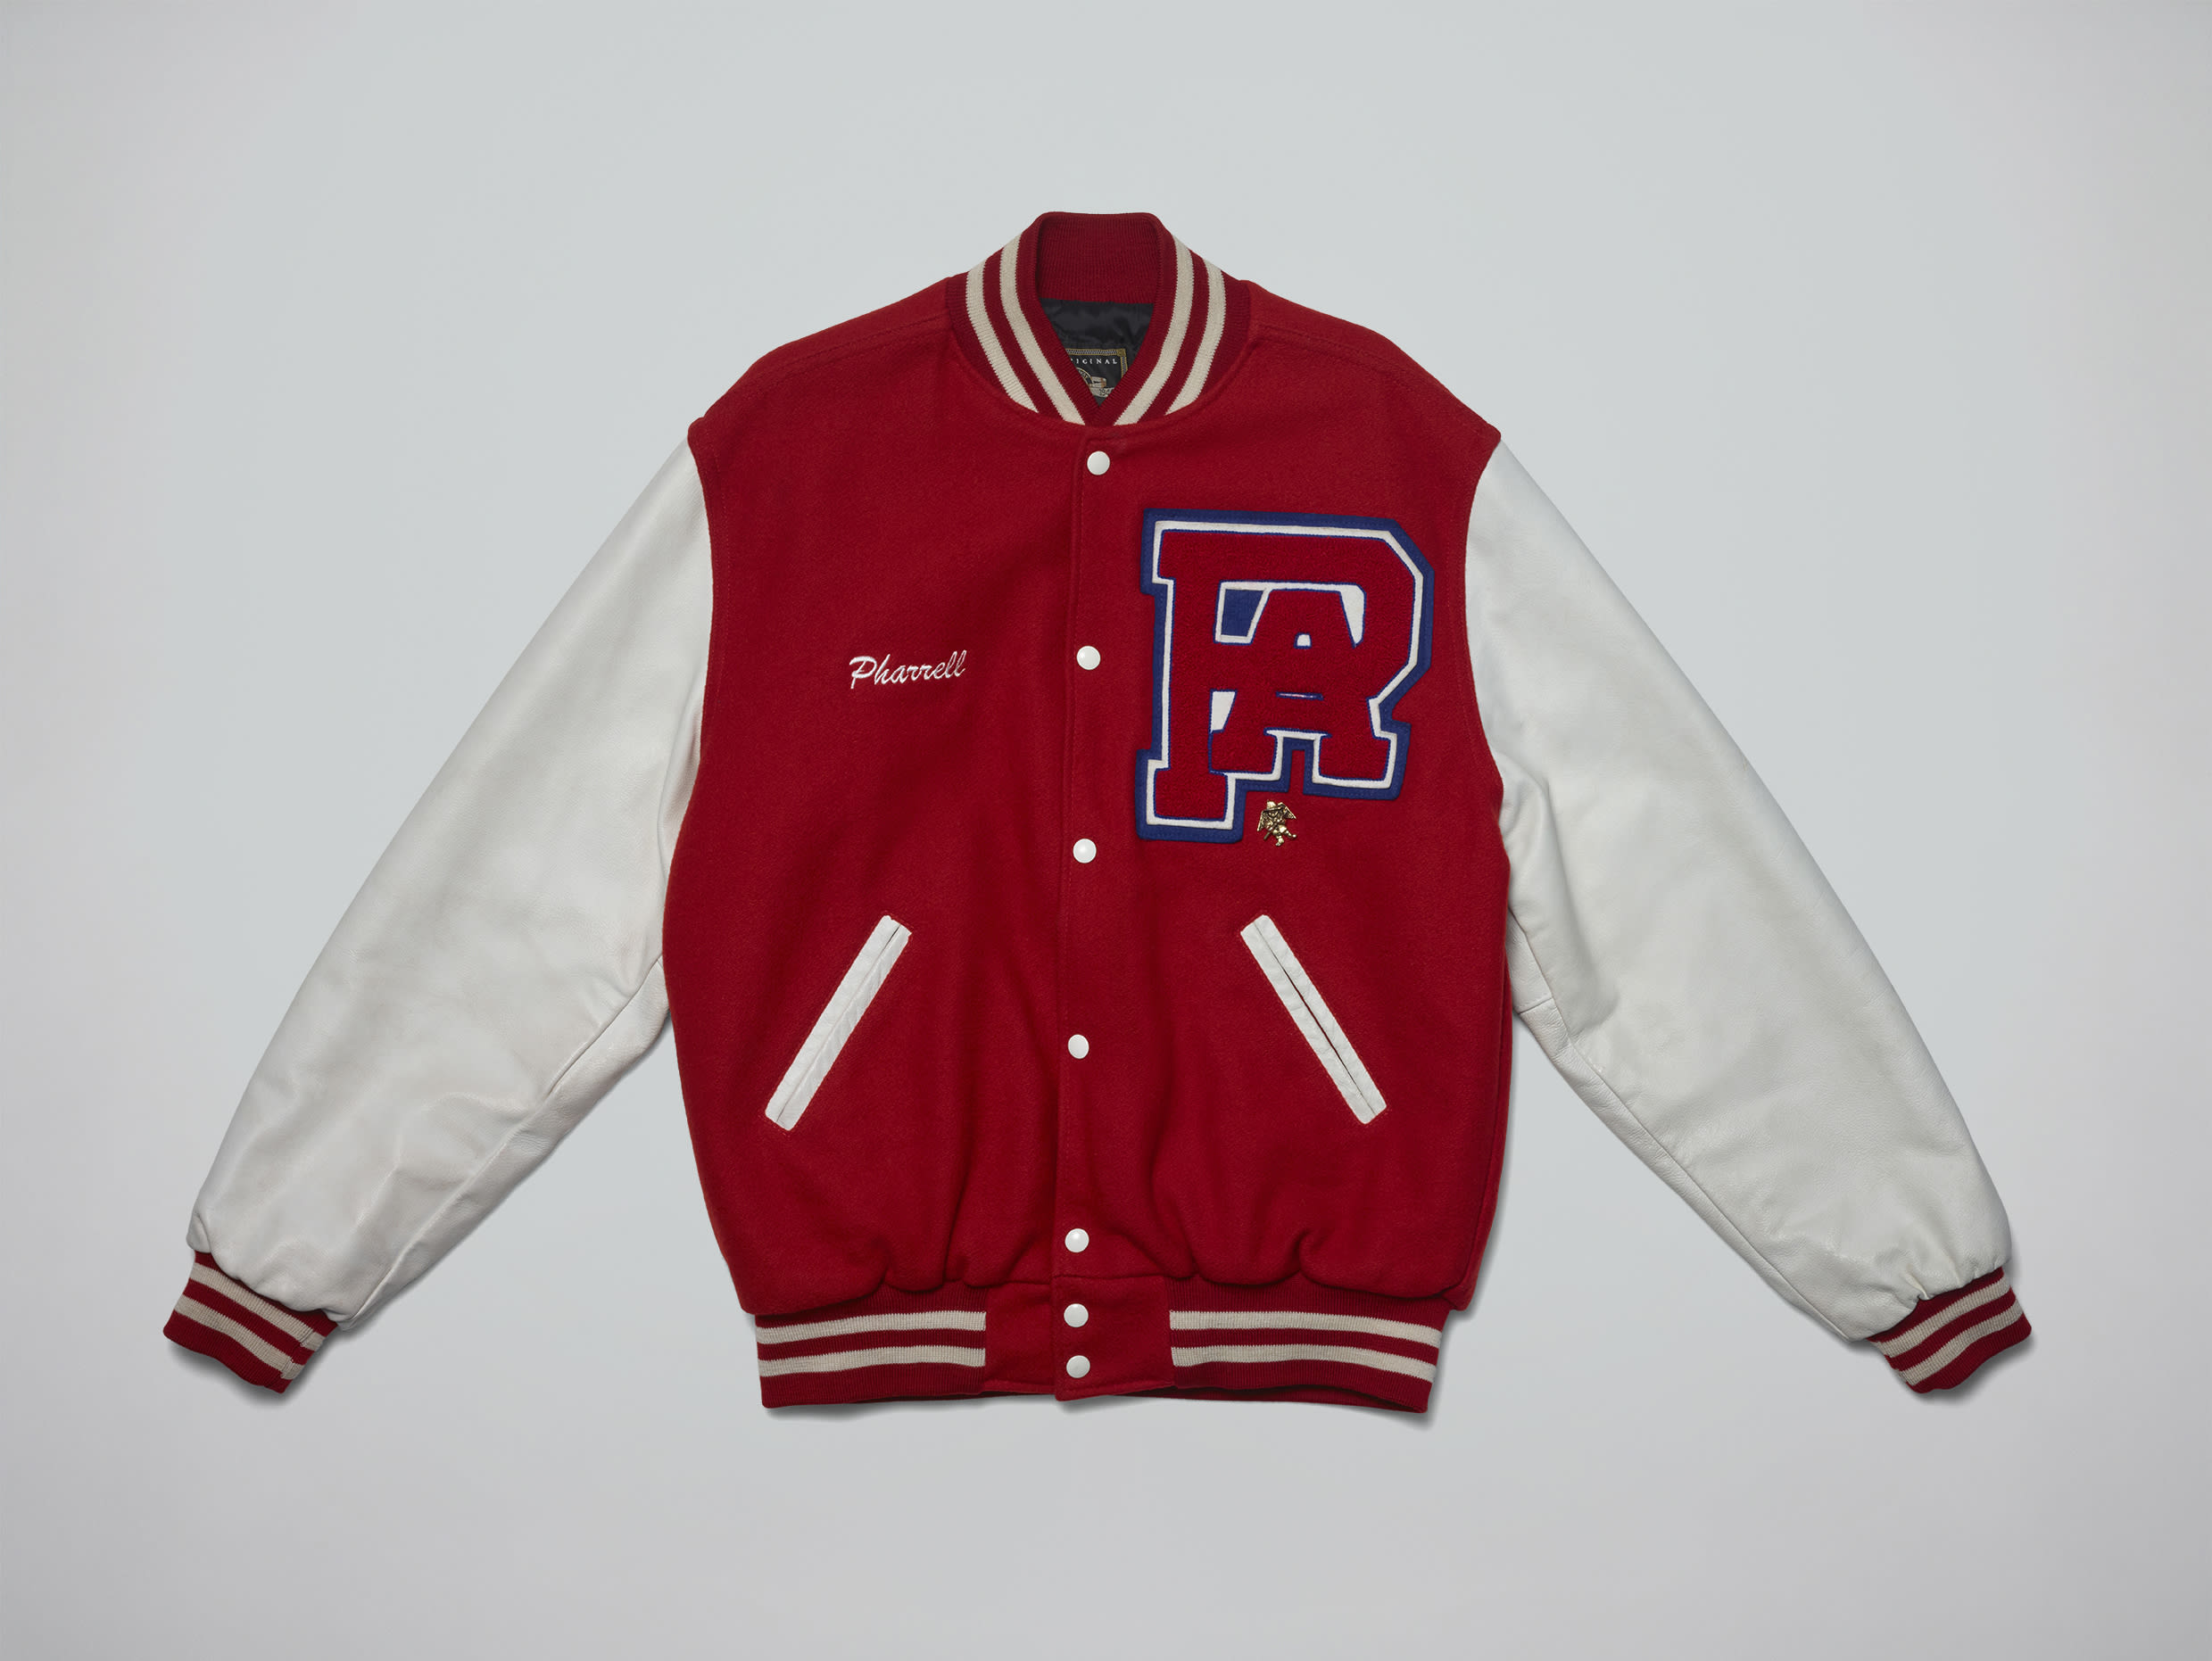 A letterman jacket is pictured